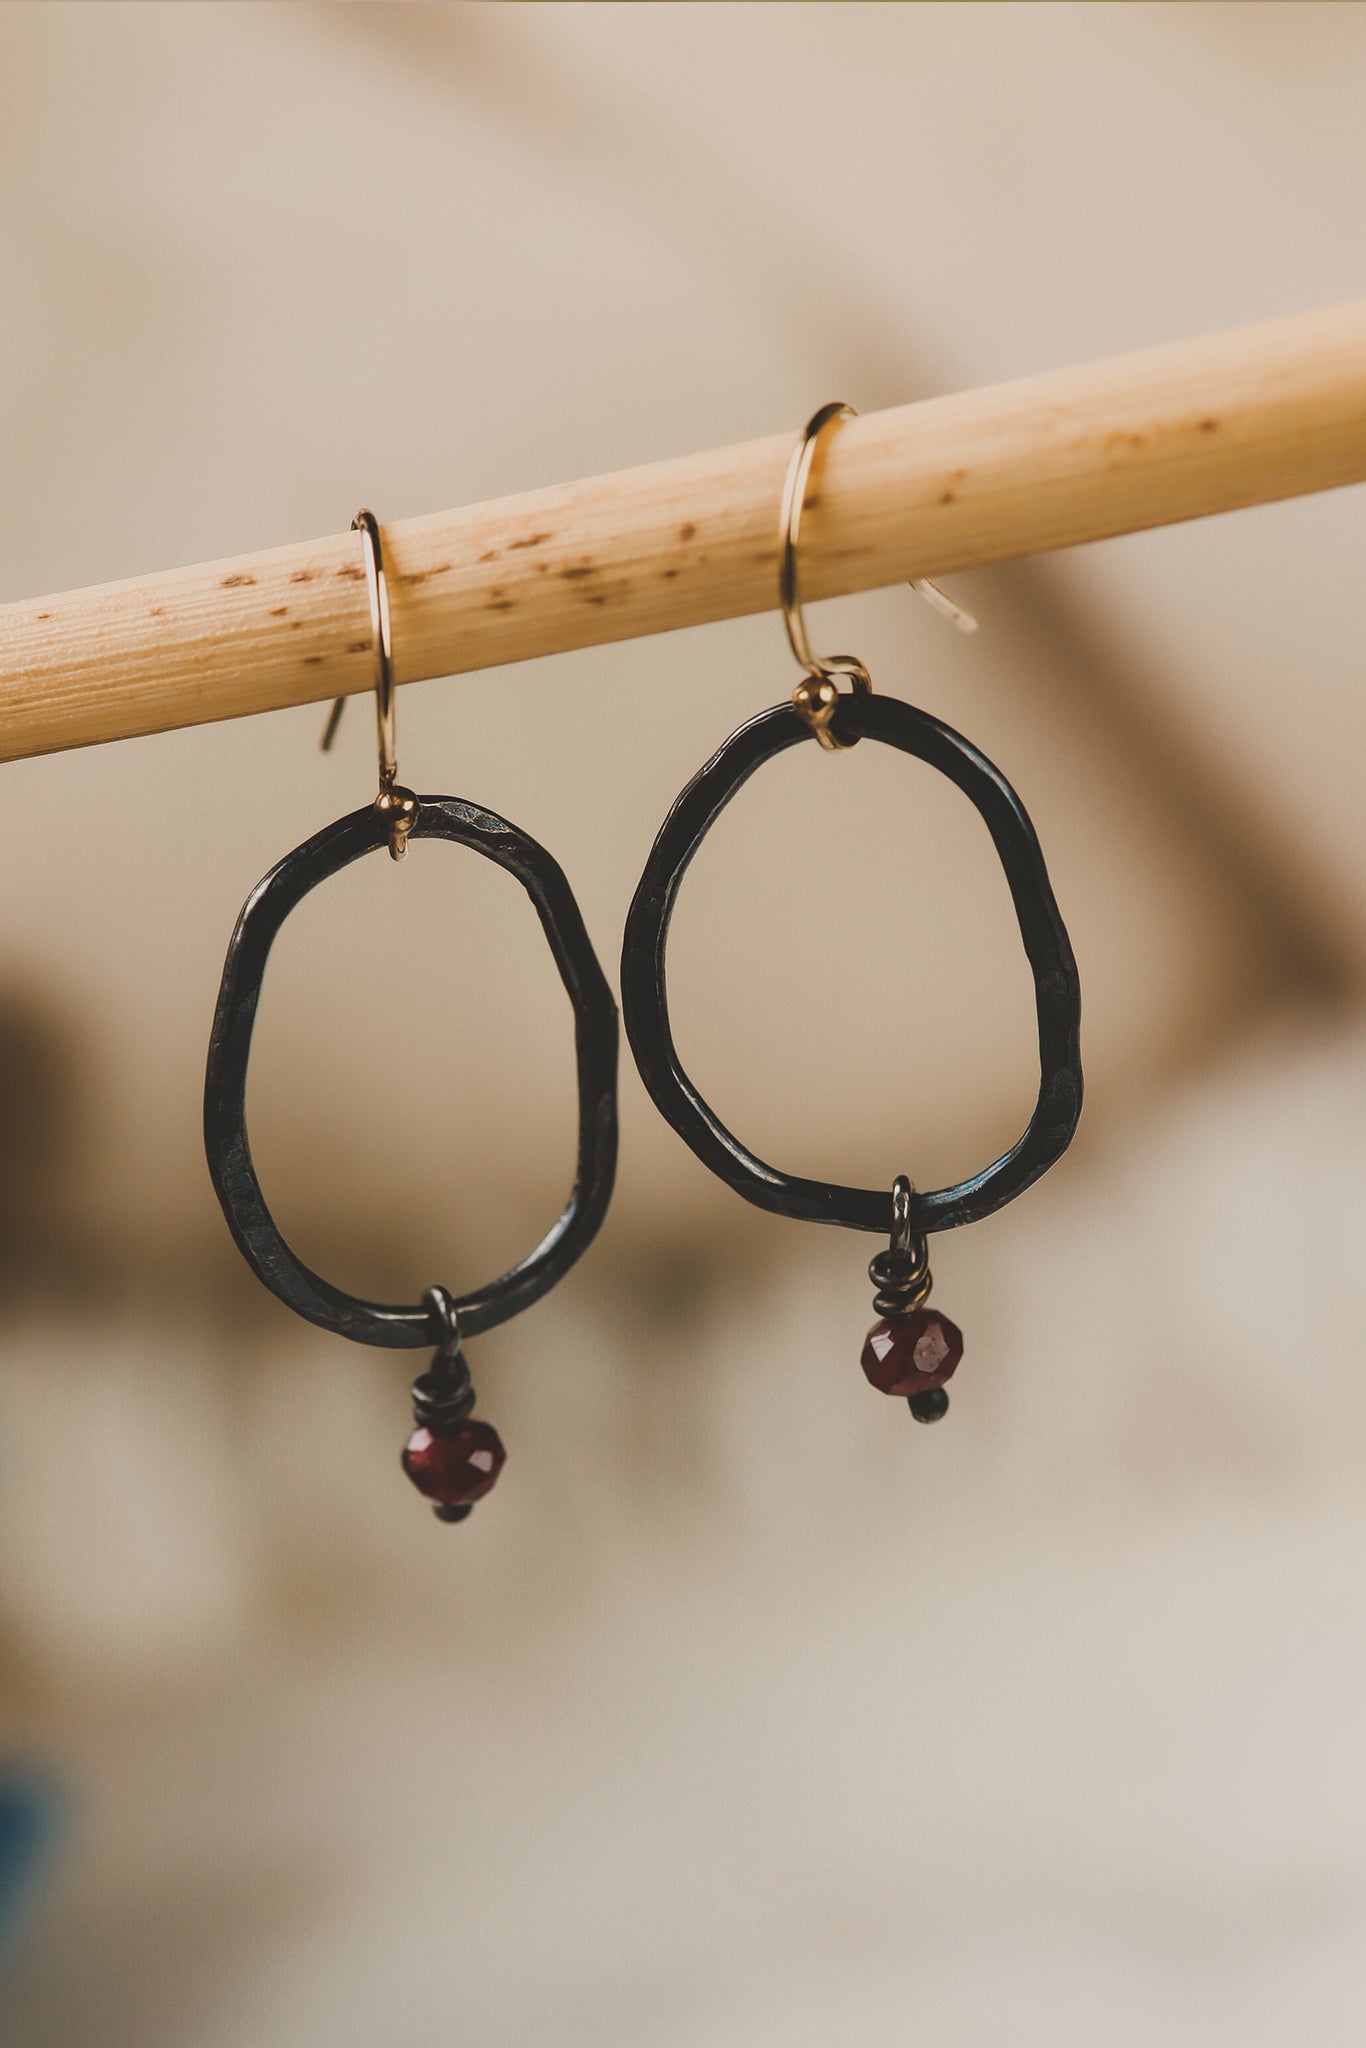 forged link earrings with garnet beads 